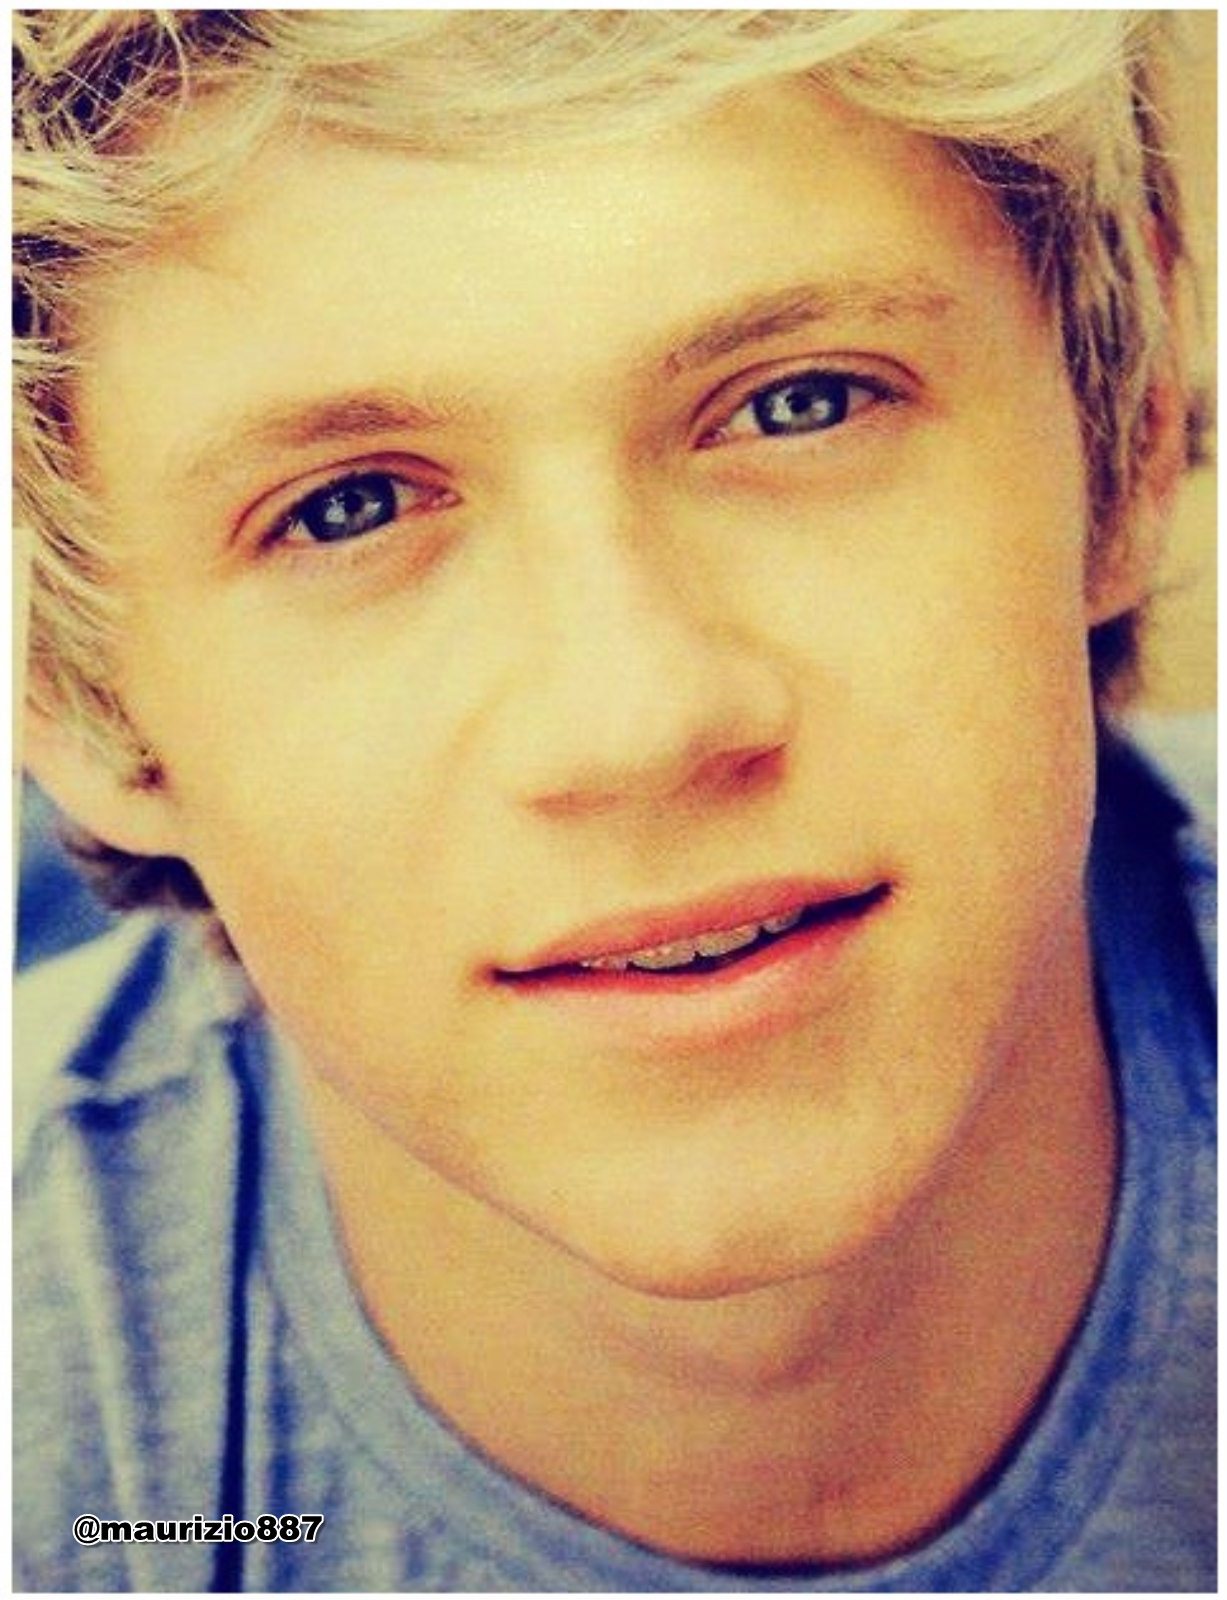 Niall-Horan-2012-one-direction-32795580-1227-1600